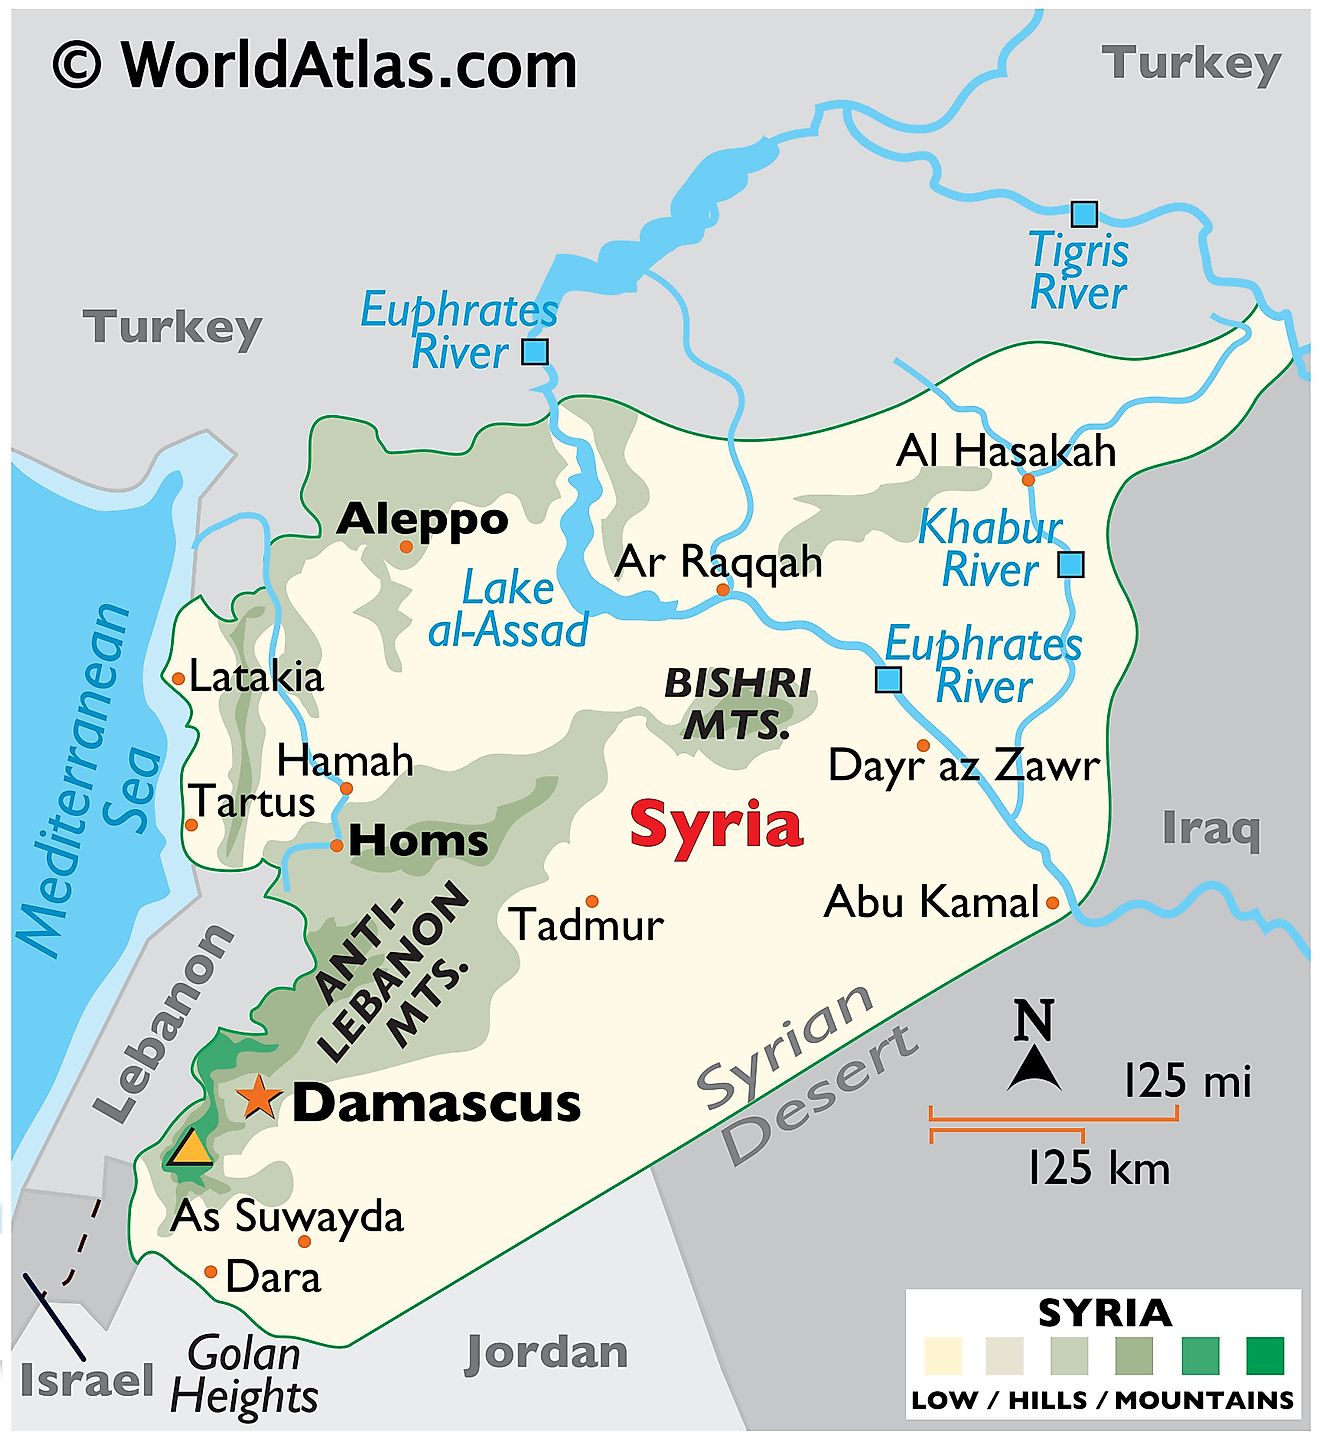 Phyiscal Map of the Syrian Arab Republic with state boundaries, relief, major mountain ranges, rivers, lakes, important cities, and more.